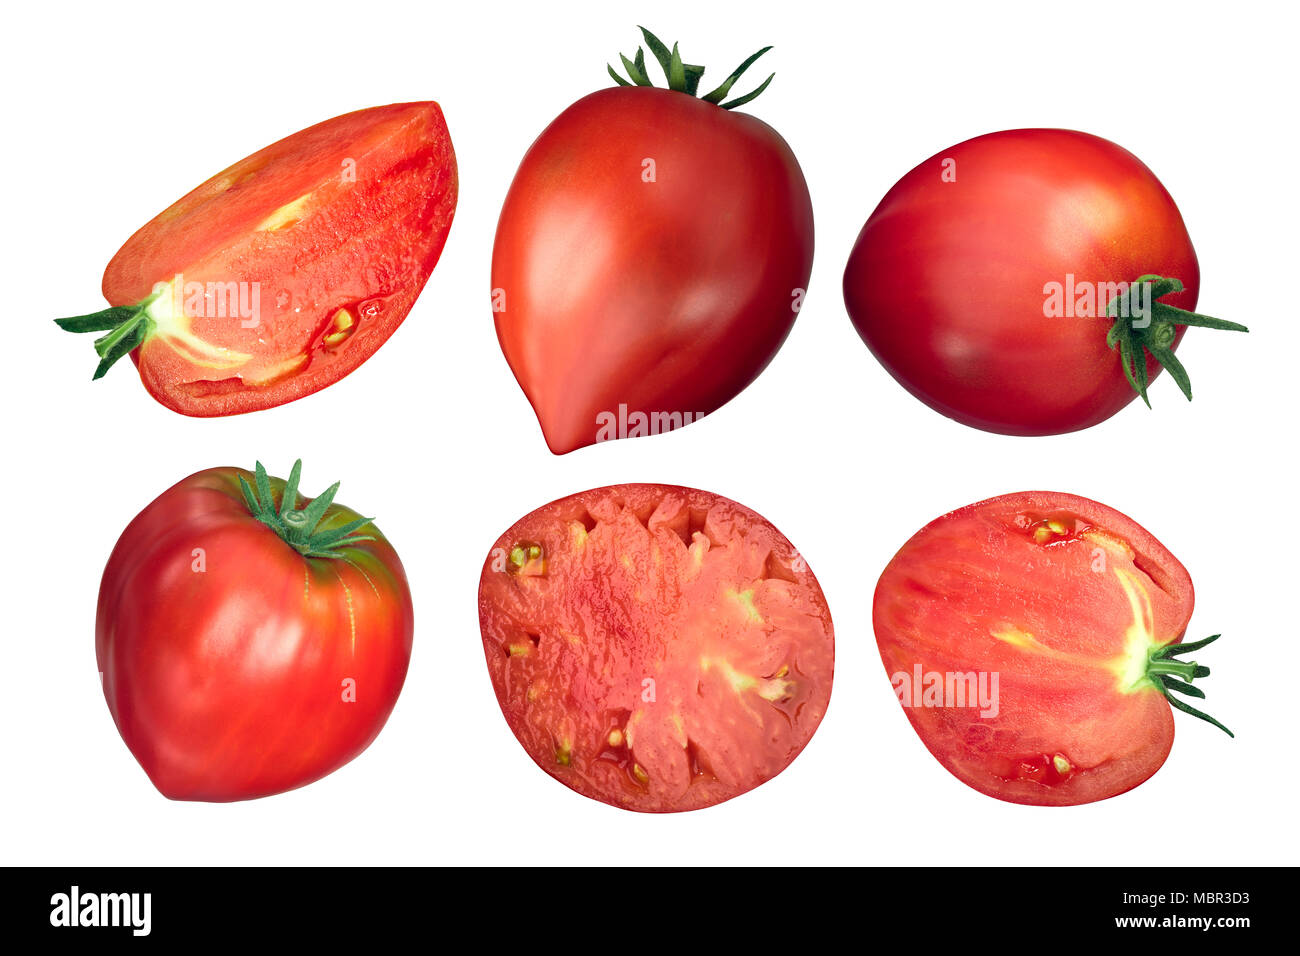 Oxheart tomatoes, whole and slices, fresh, top view Stock Photo